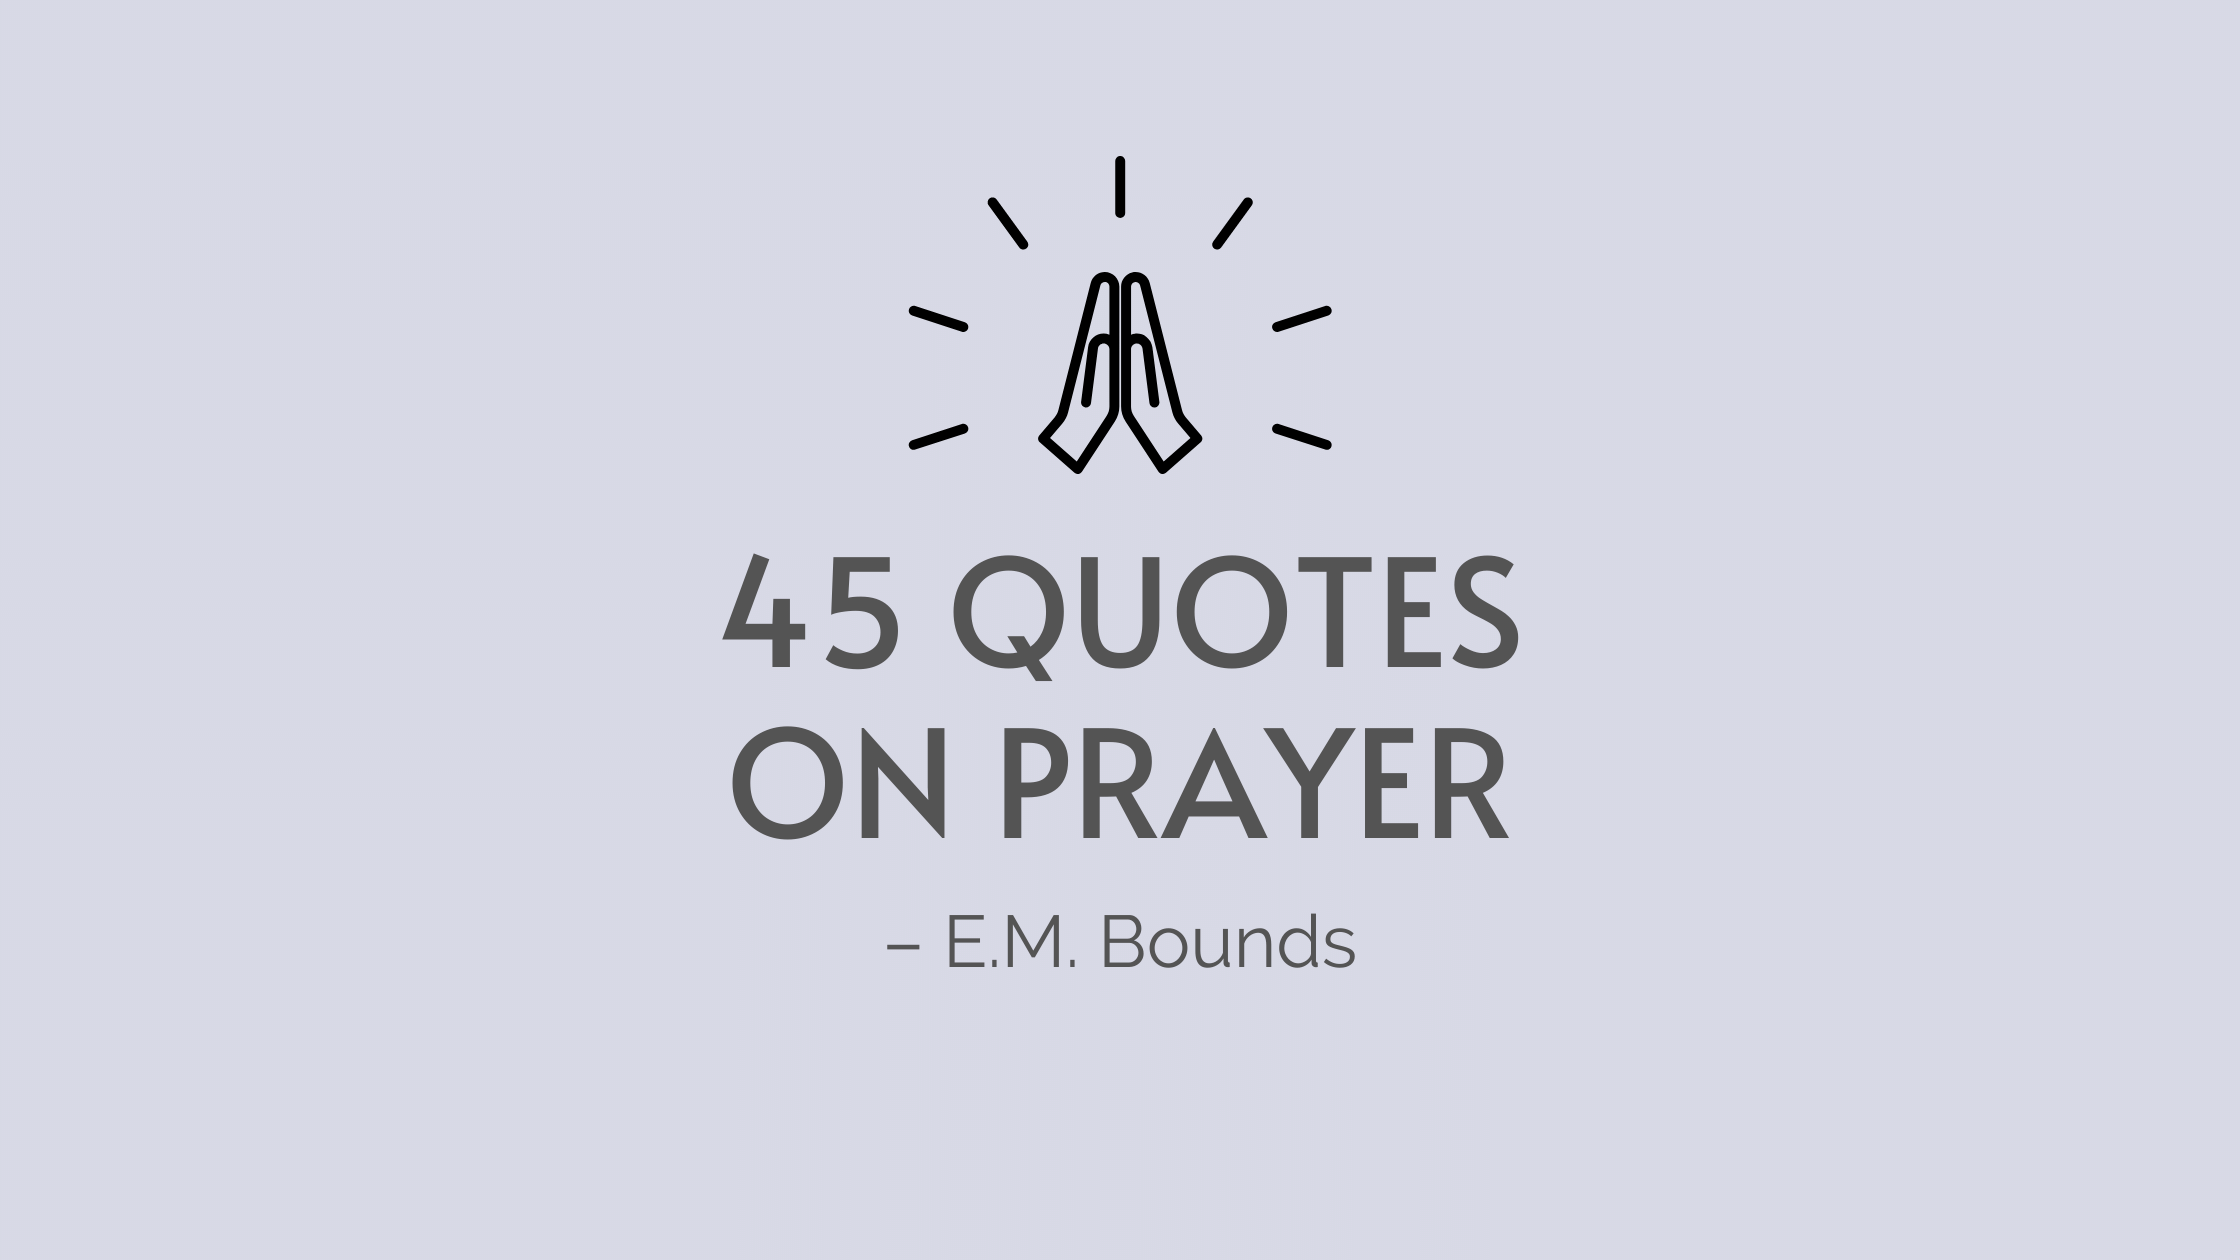 E.M. Bounds Quotes on Prayer